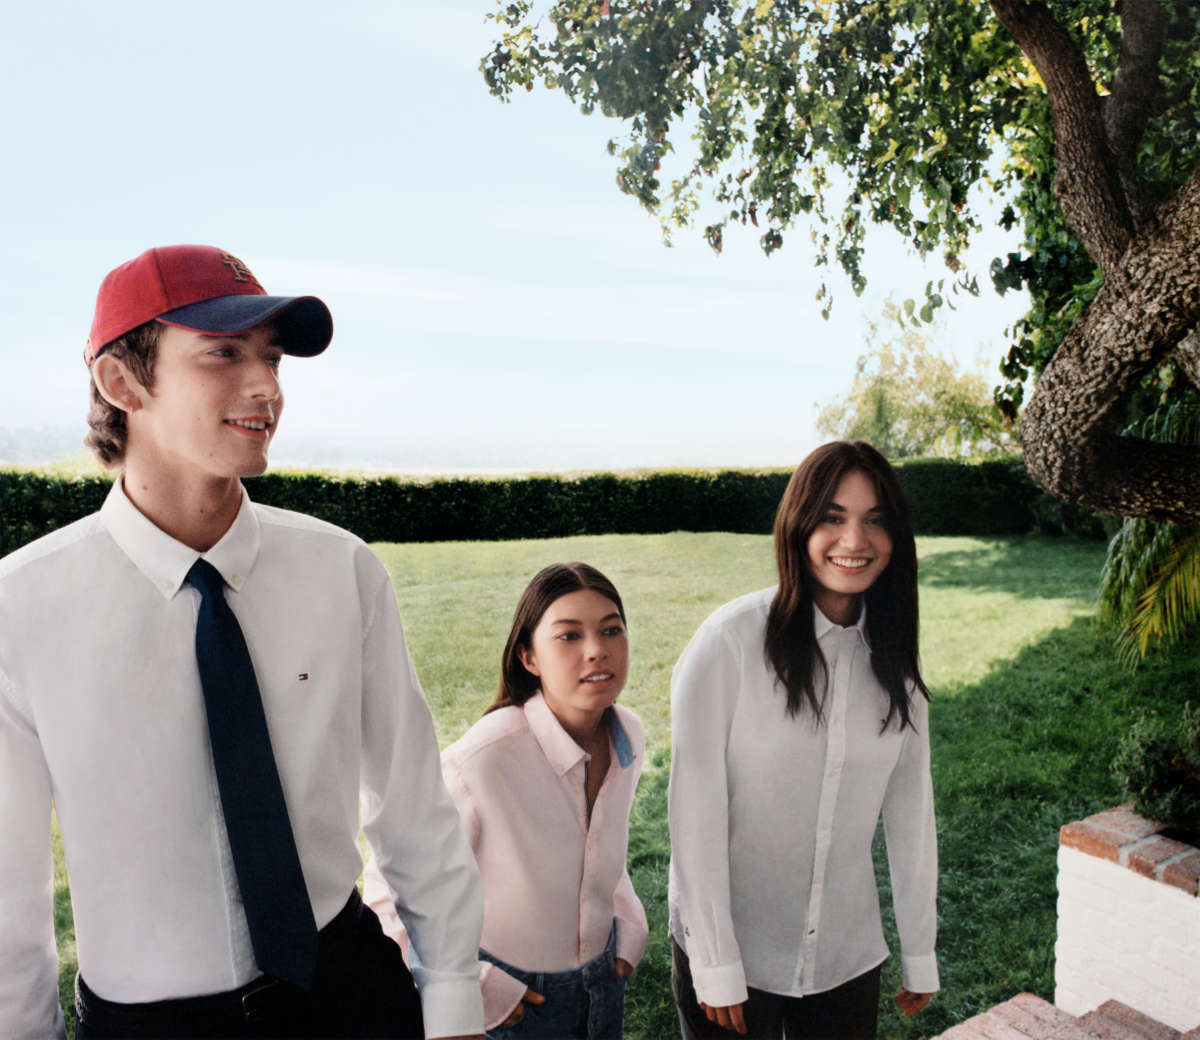 Tommy Hilfiger Brings Together Fashion & Music Royalty For Fall 2023 Campaign